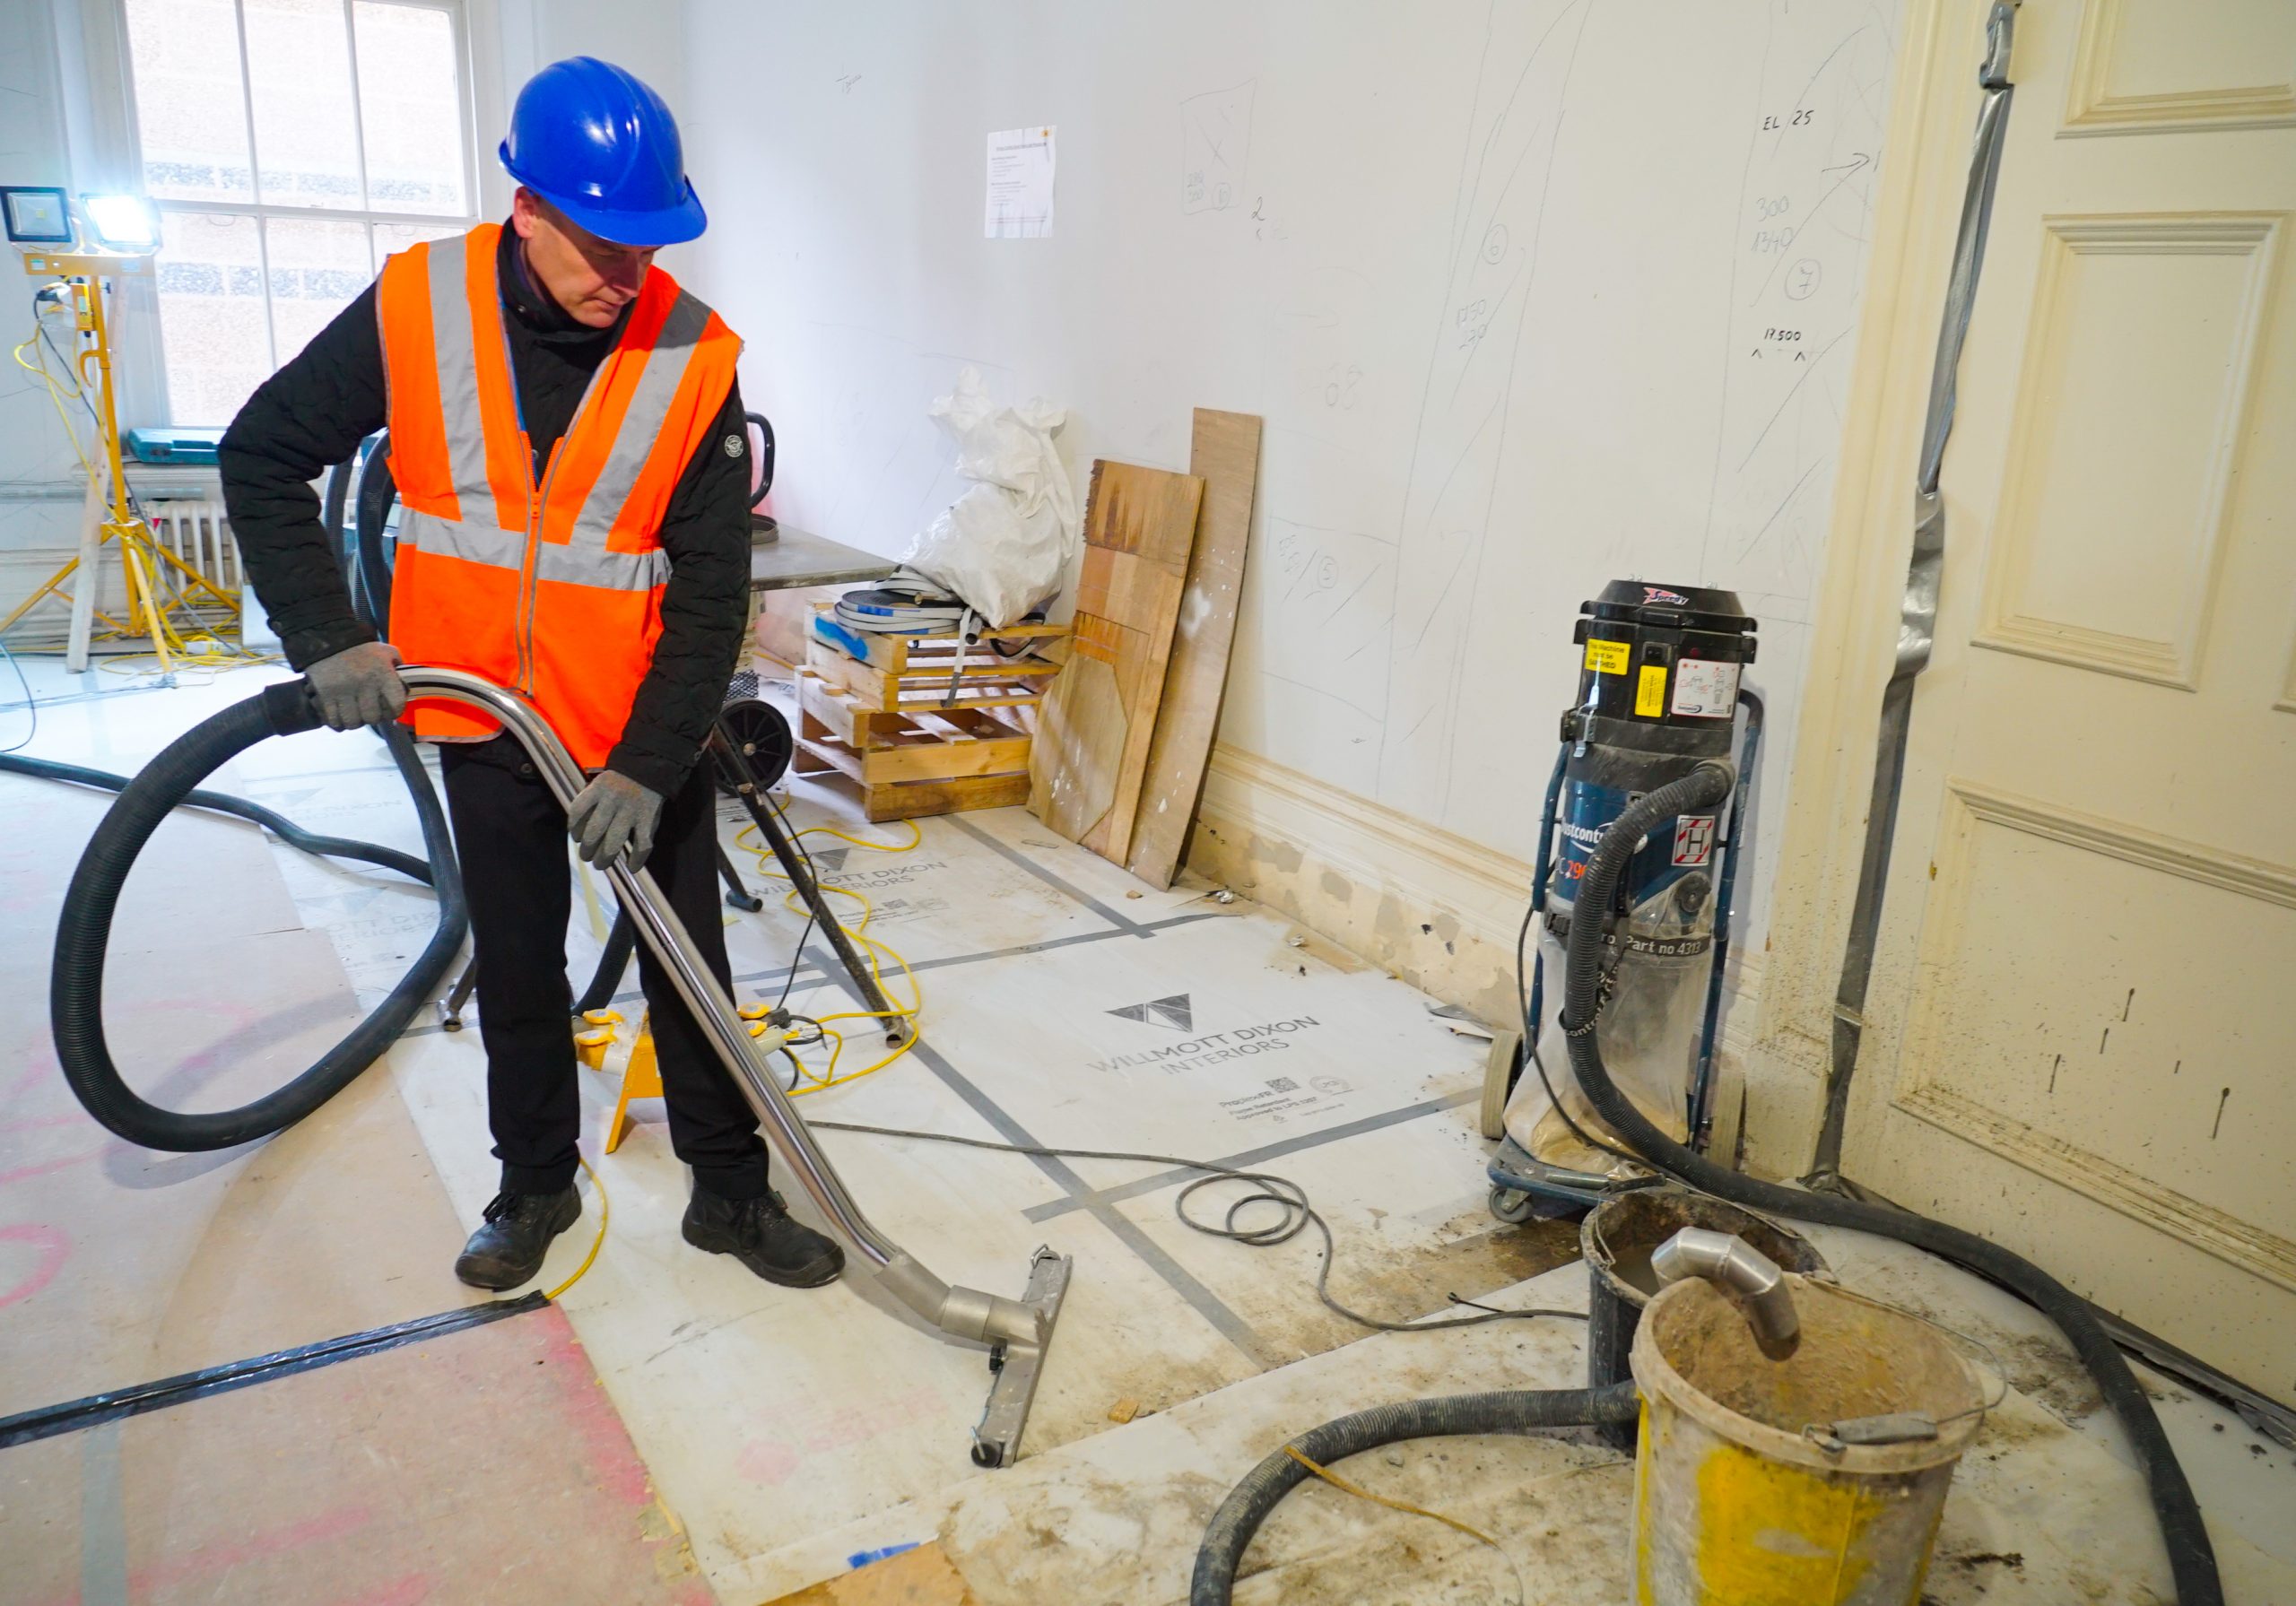 Putting the correct HSE measures in place to protect workers from harmful silica dust and airborne viruses  @DustcontrolUK